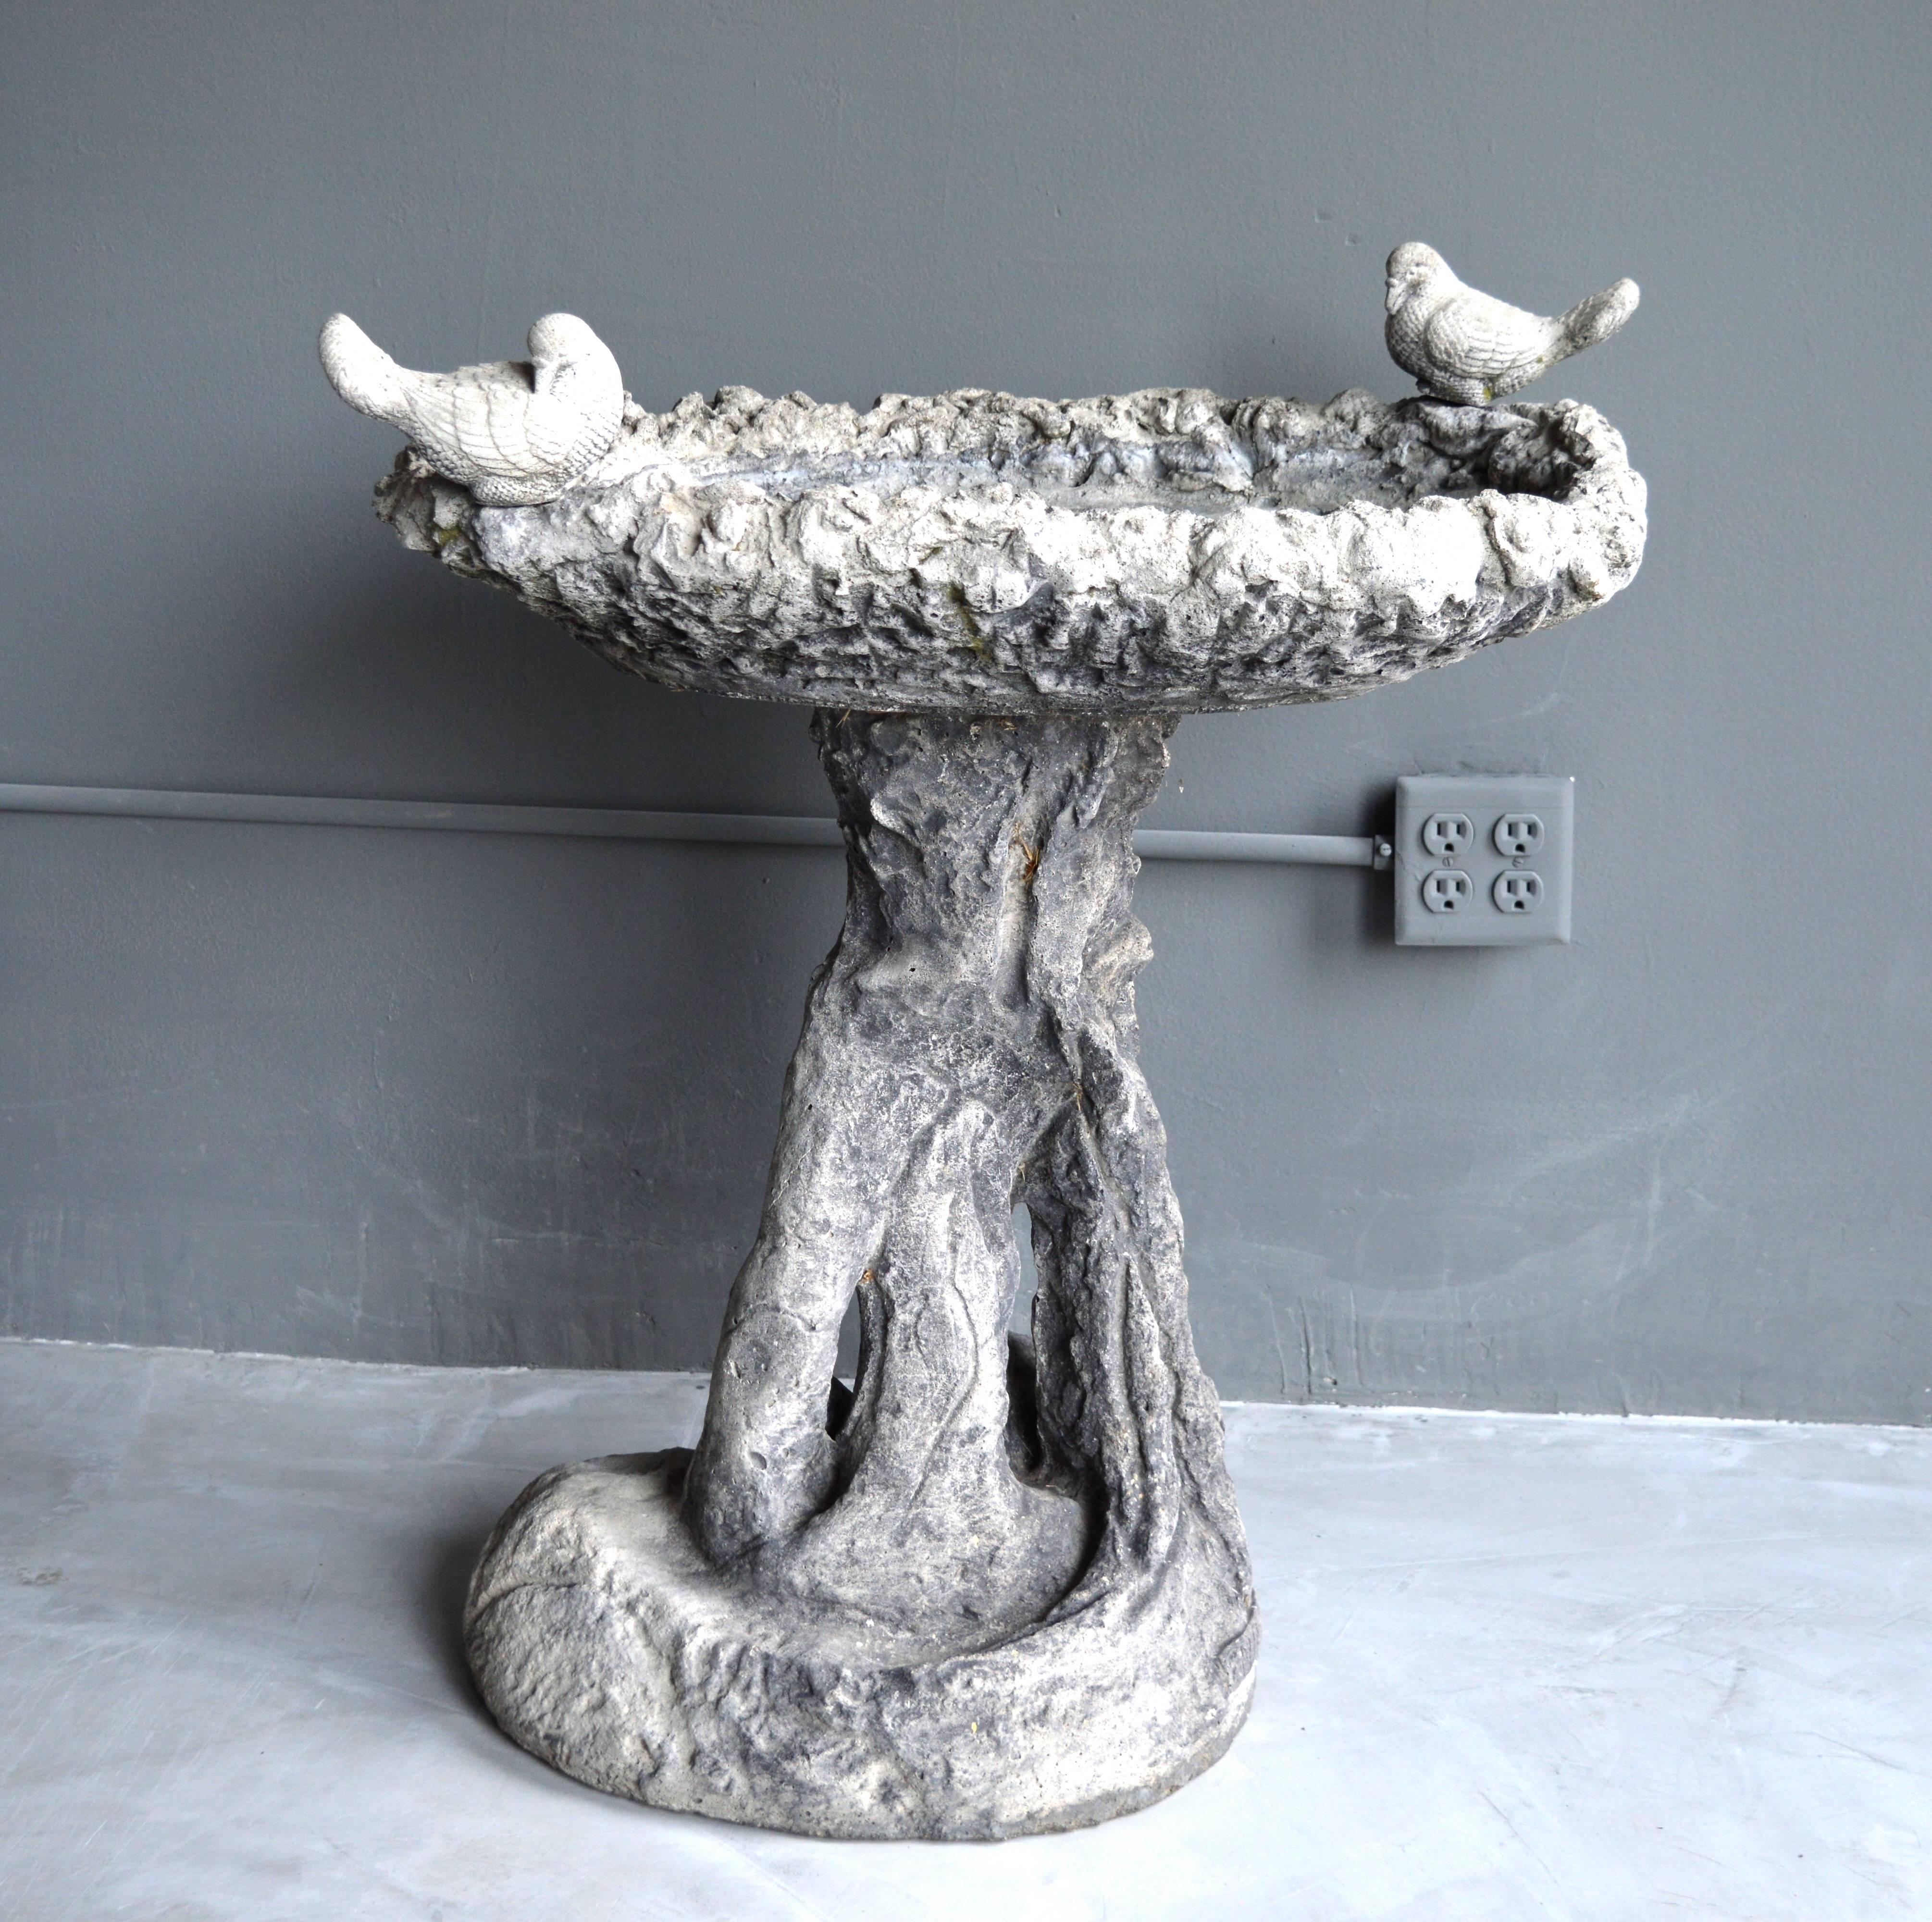 Gorgeous cement bird bath with two birds and large drinking tray. Very heavy and solid sculpture. Marked 